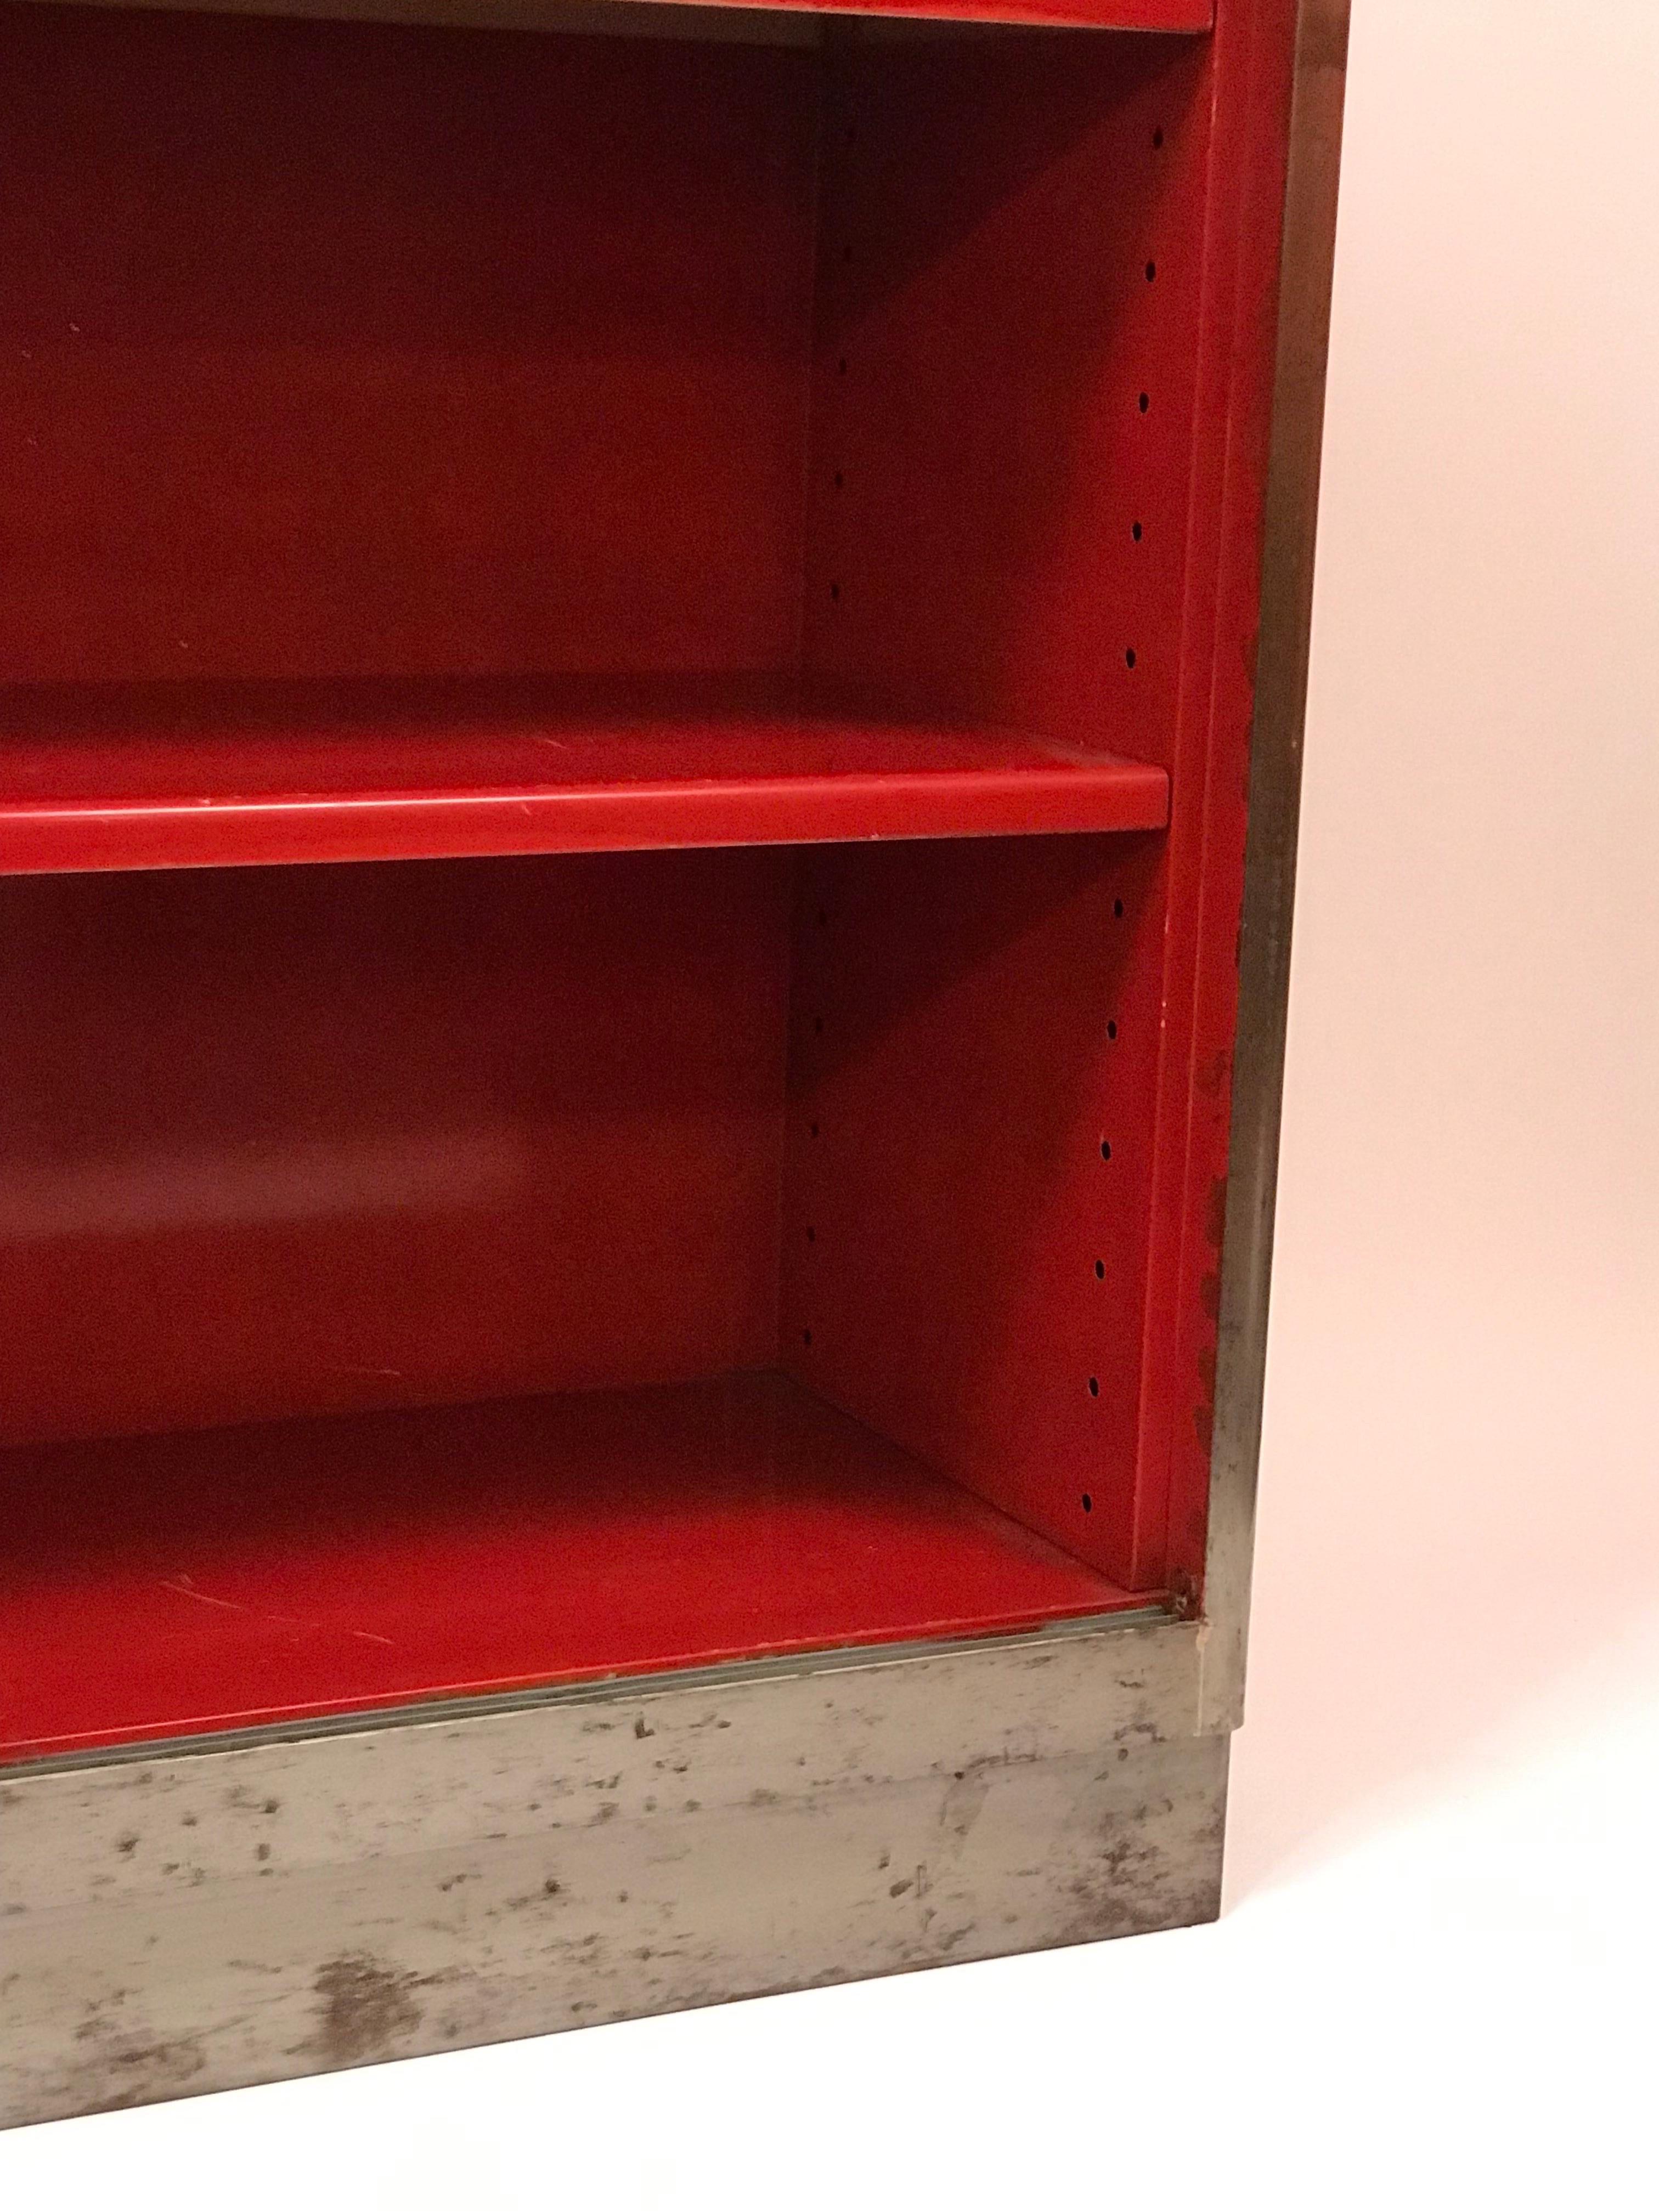 Vintage Art Metal Inc Steel Three Shelf Book Case with Bright Red Interior For Sale 4